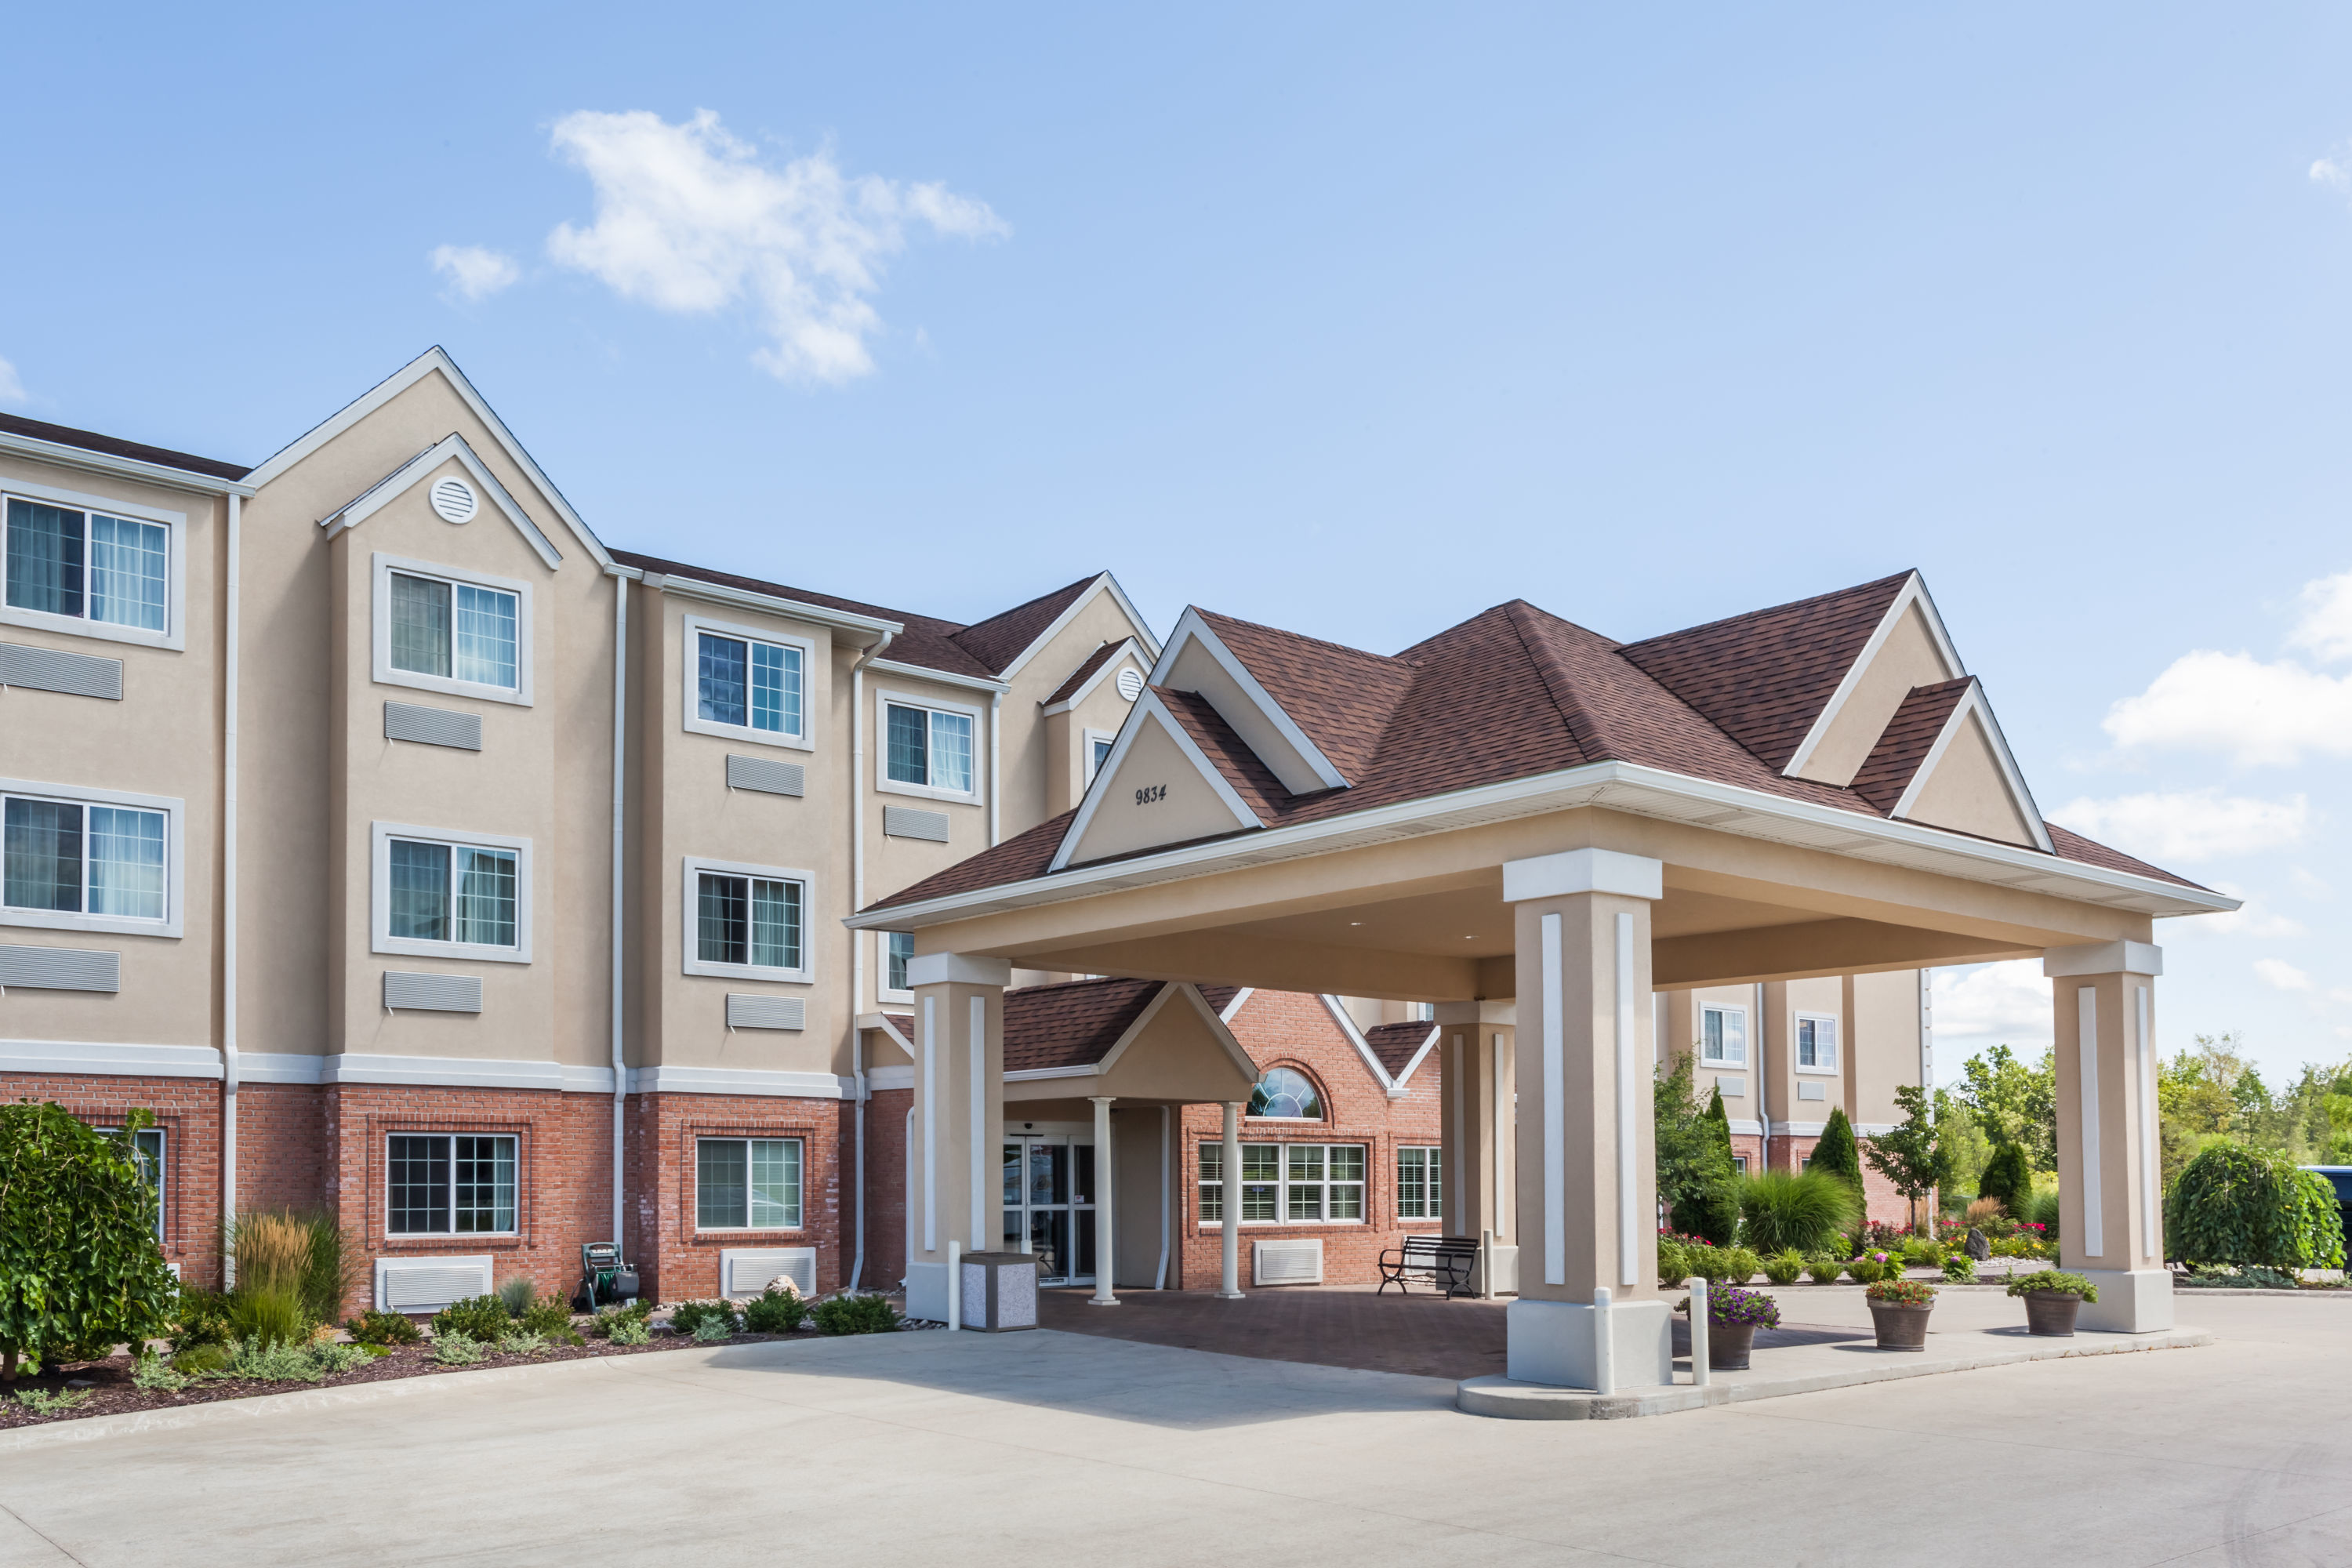 Photo of Microtel Inn & Suites by Wyndham Michigan City, Michigan City, IN